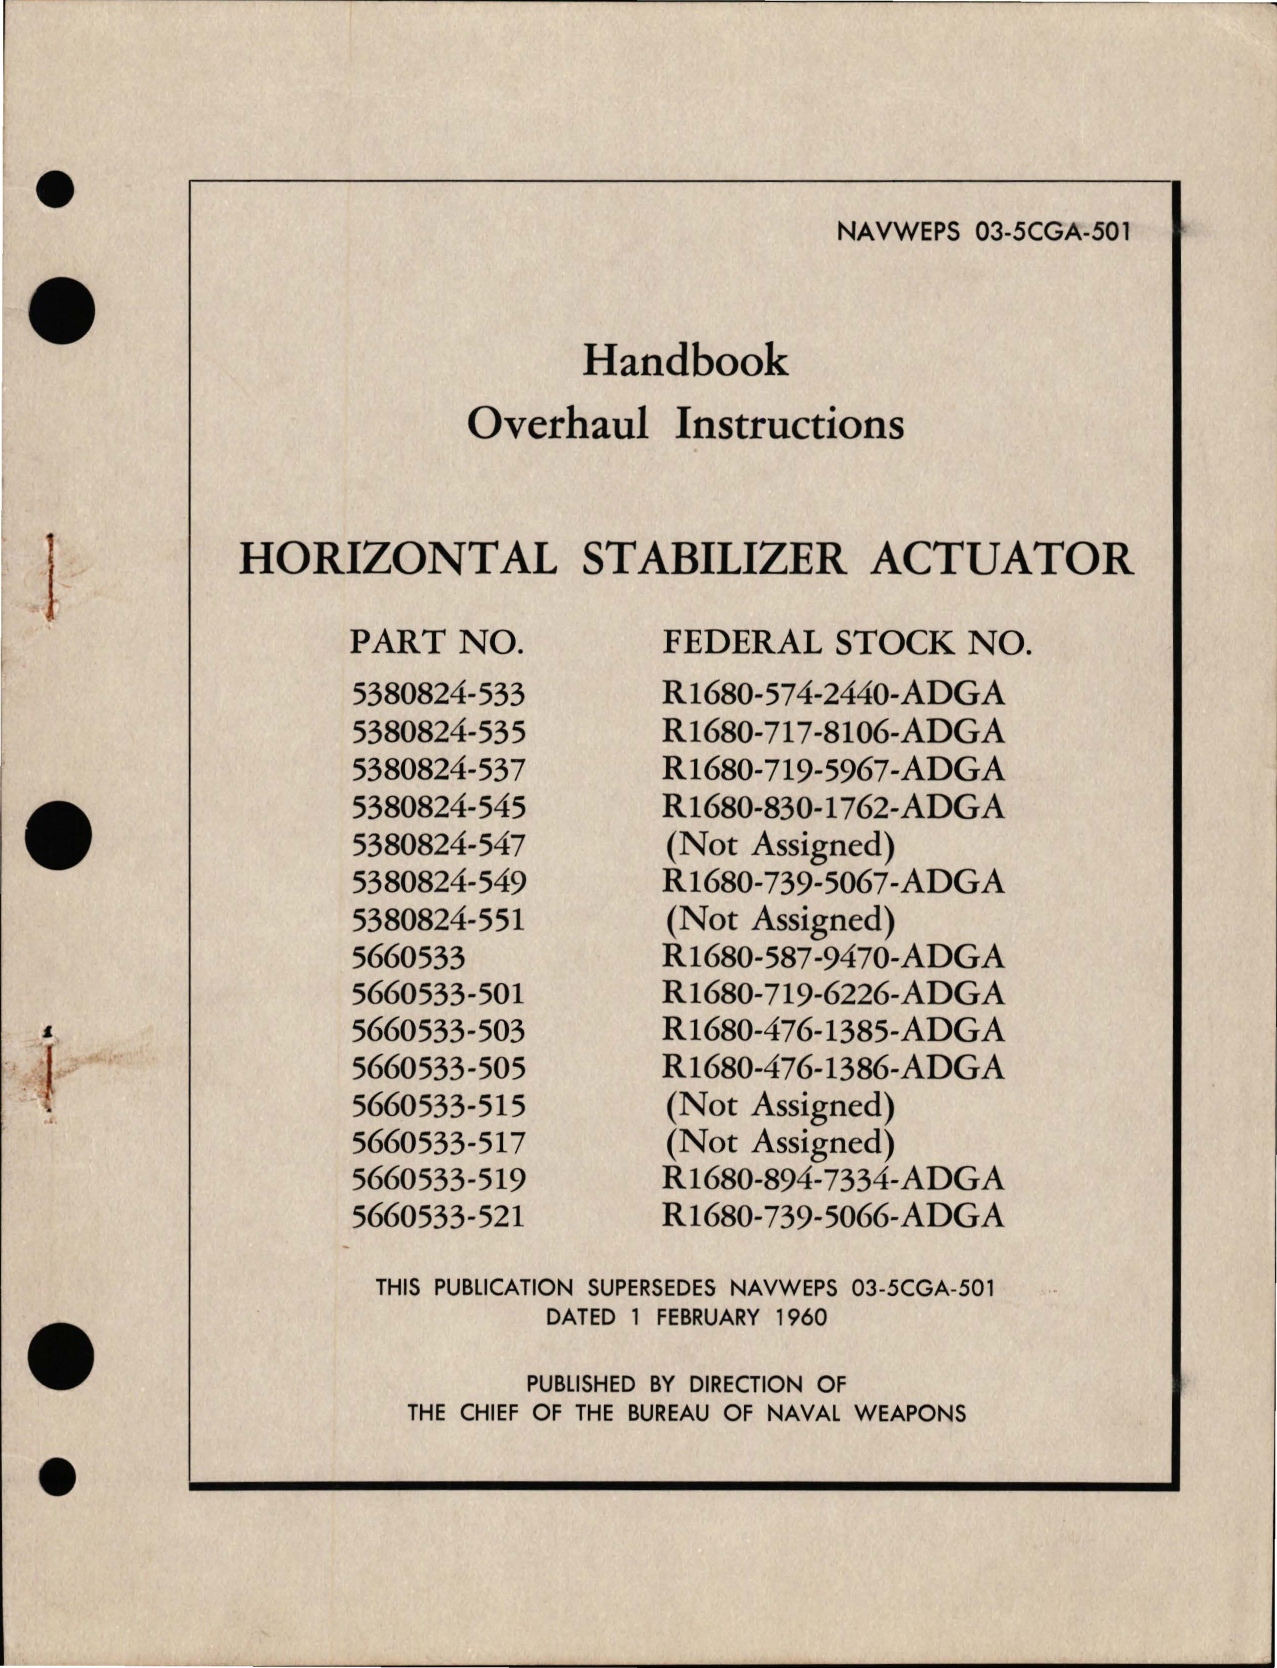 Sample page 1 from AirCorps Library document: Overhaul Instructions for Horizontal Stabilizer Actuator 